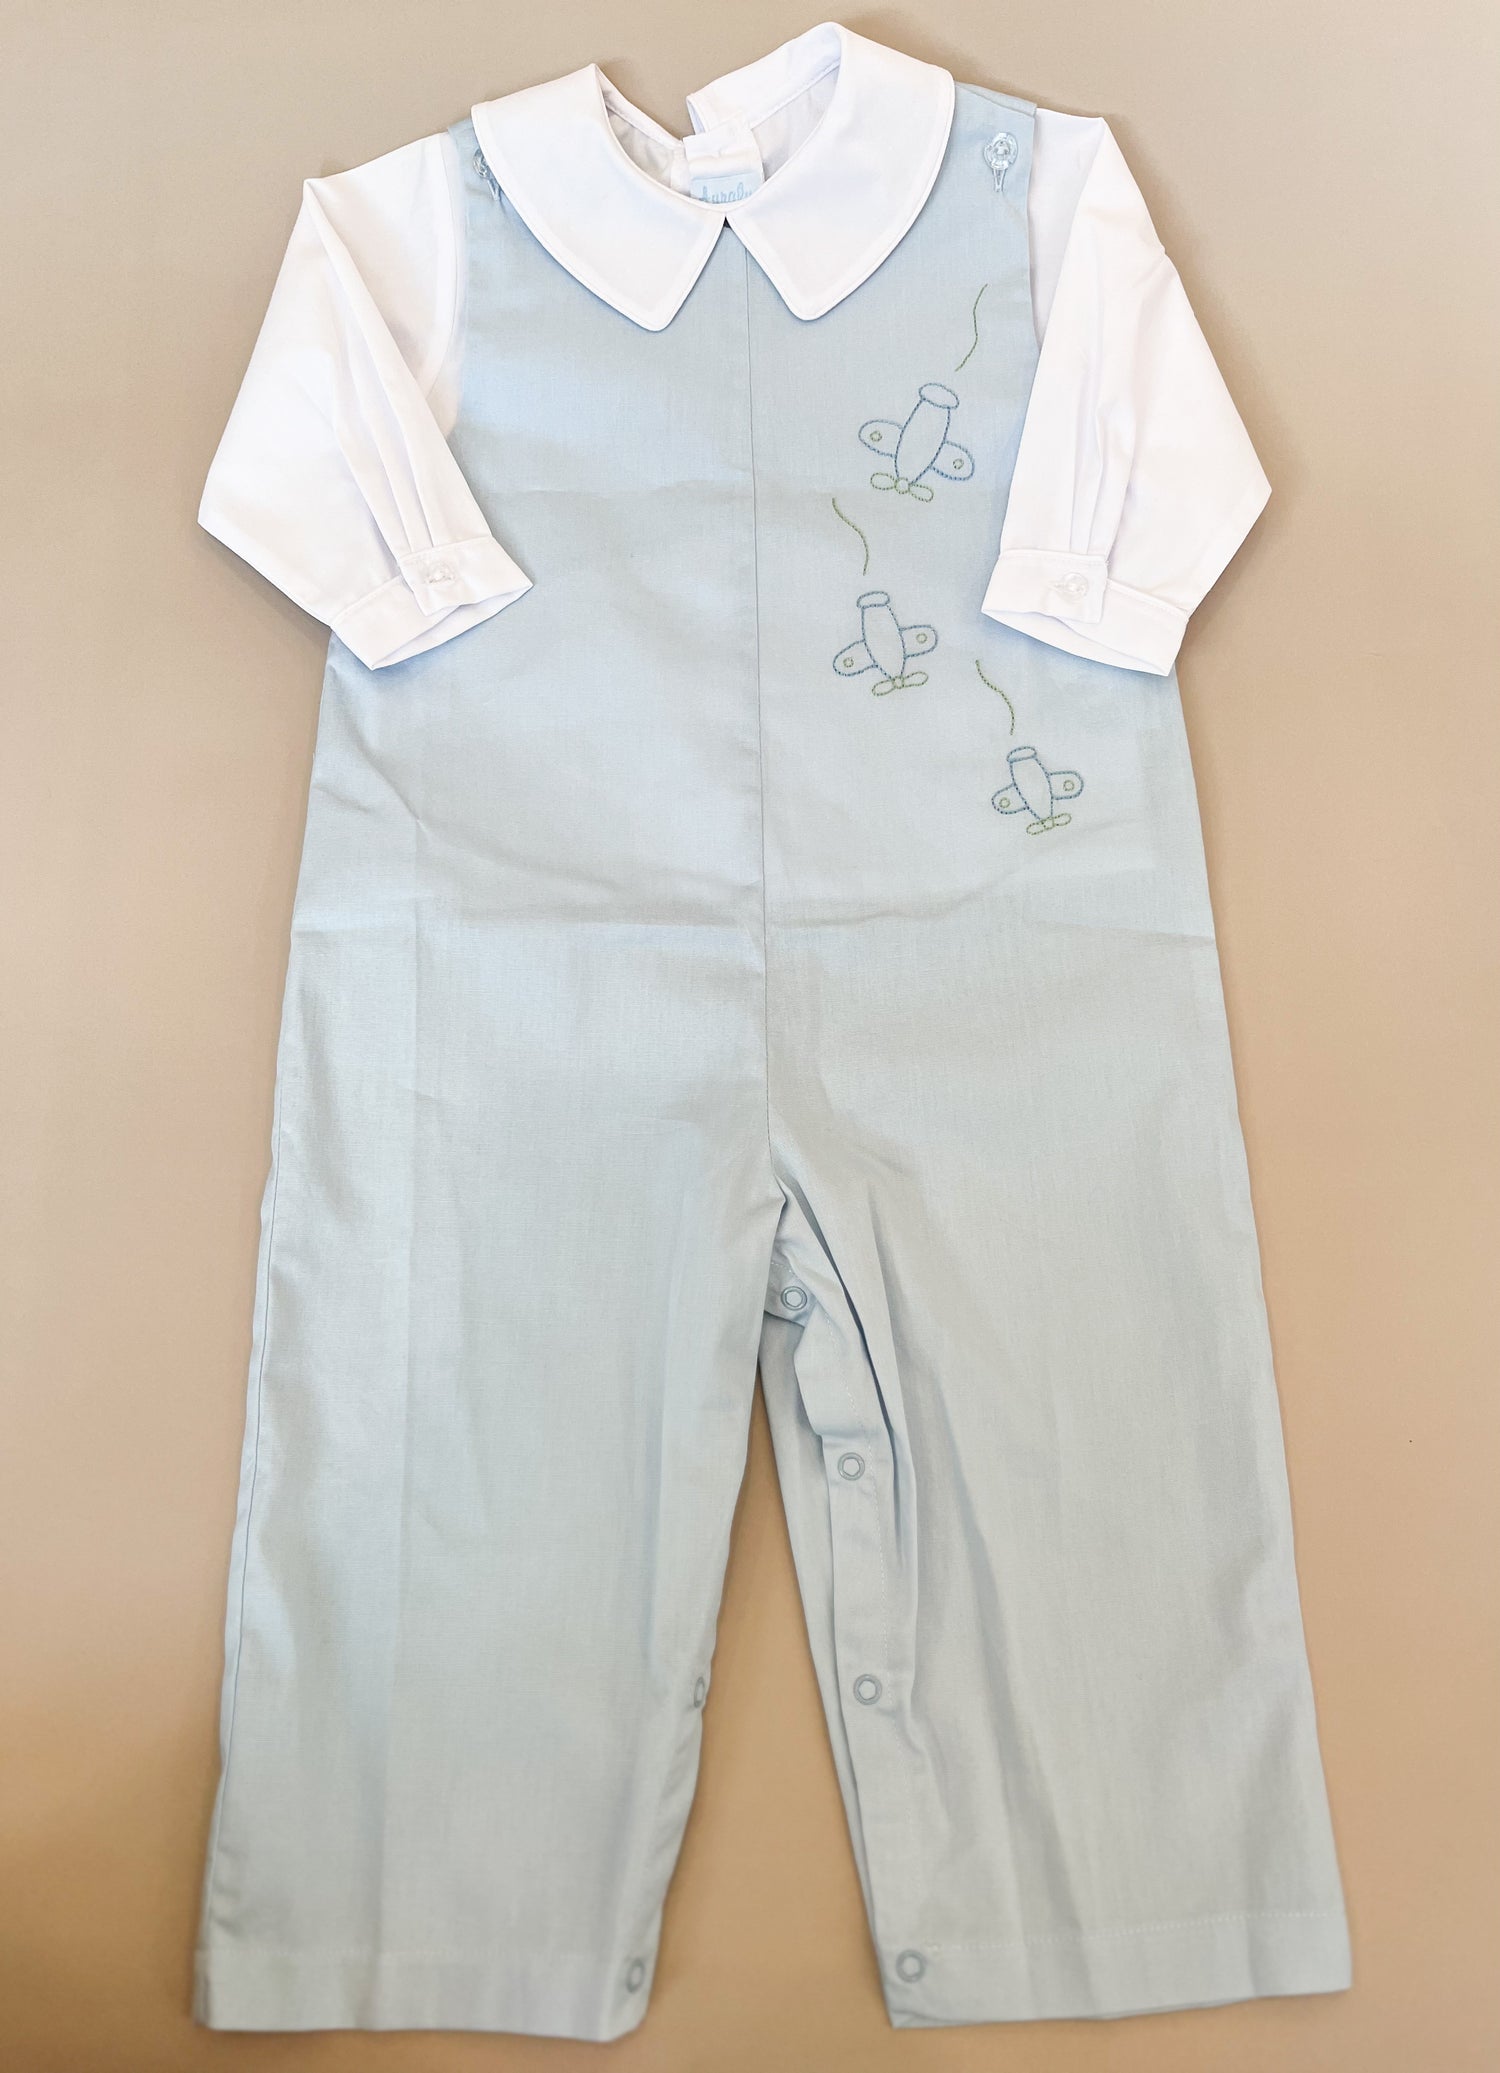 Embroidered Plane Overall & Shirt Set - Magpies Paducah